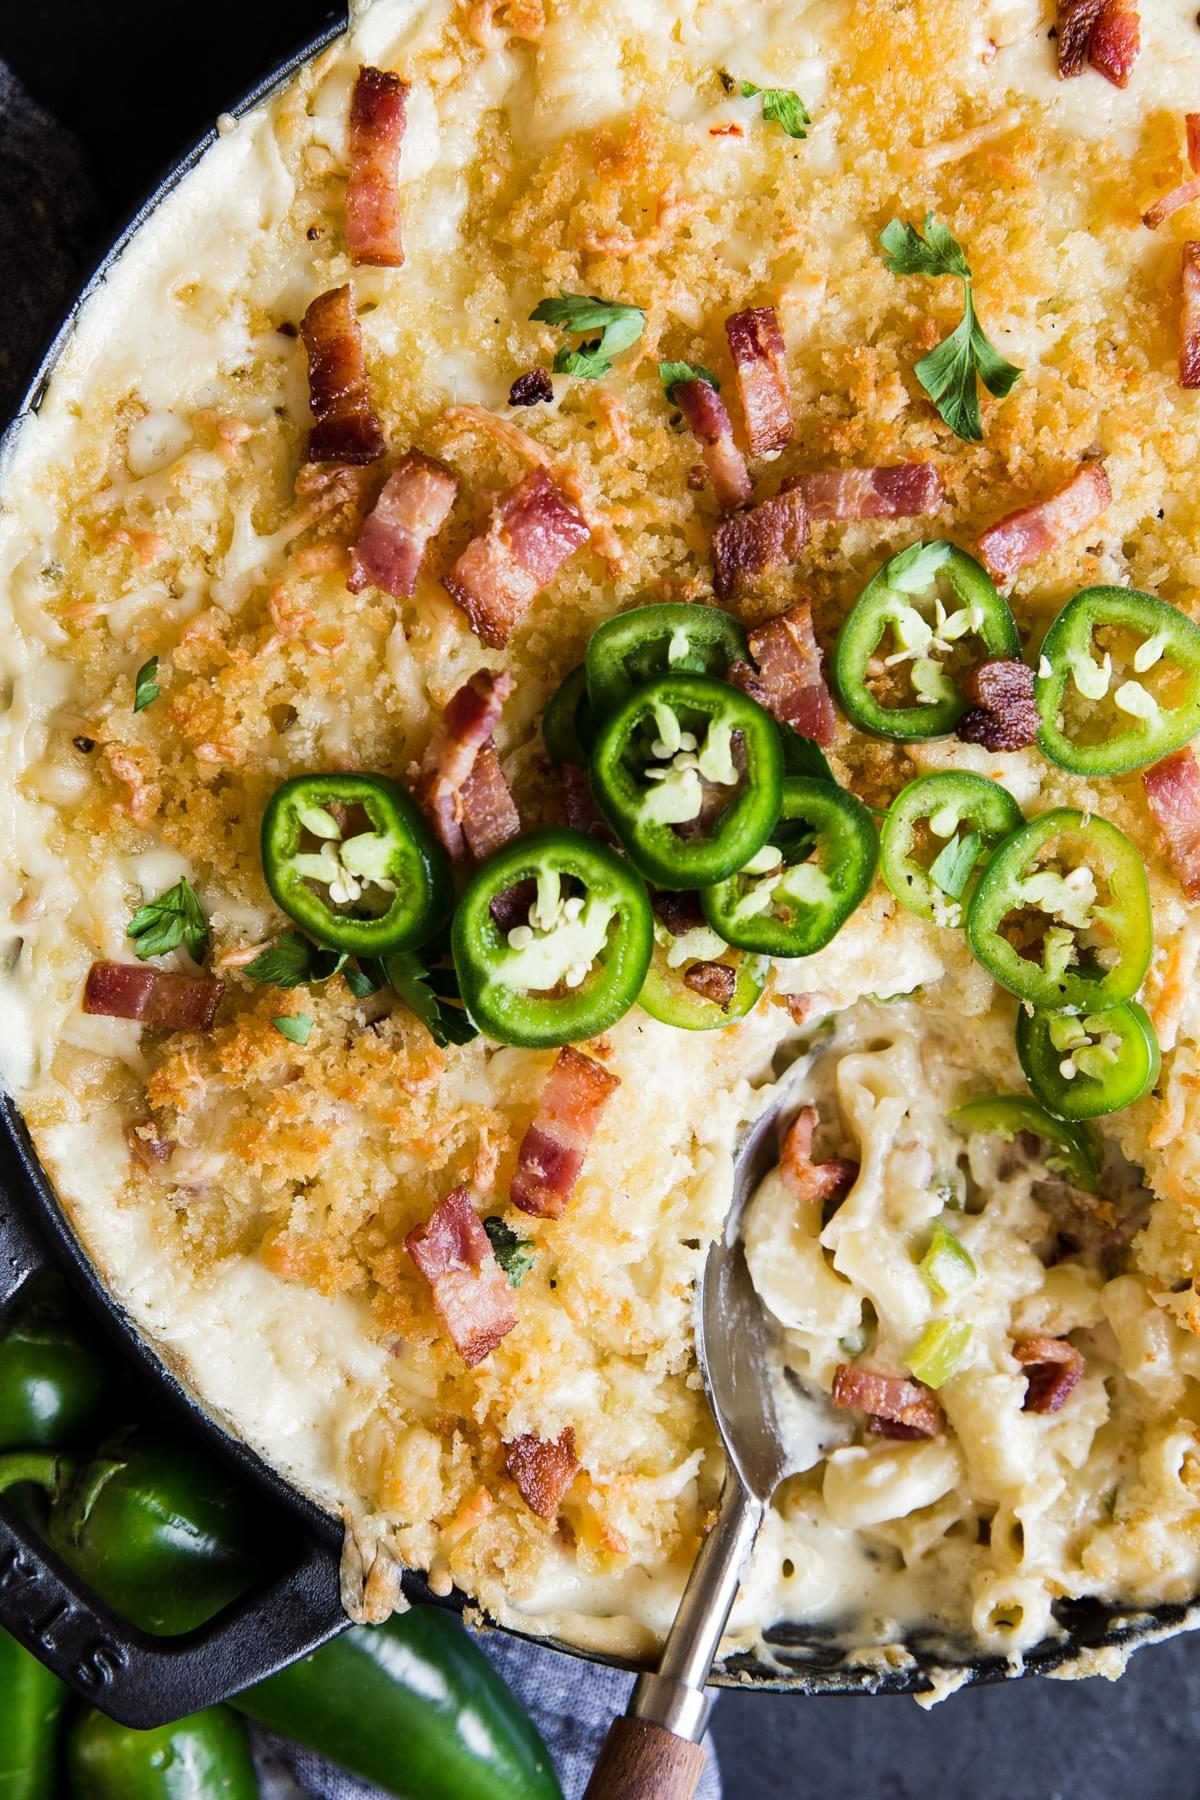 Baked Jalapeno Popper Mac And Cheese with toasted panko bread crumbs